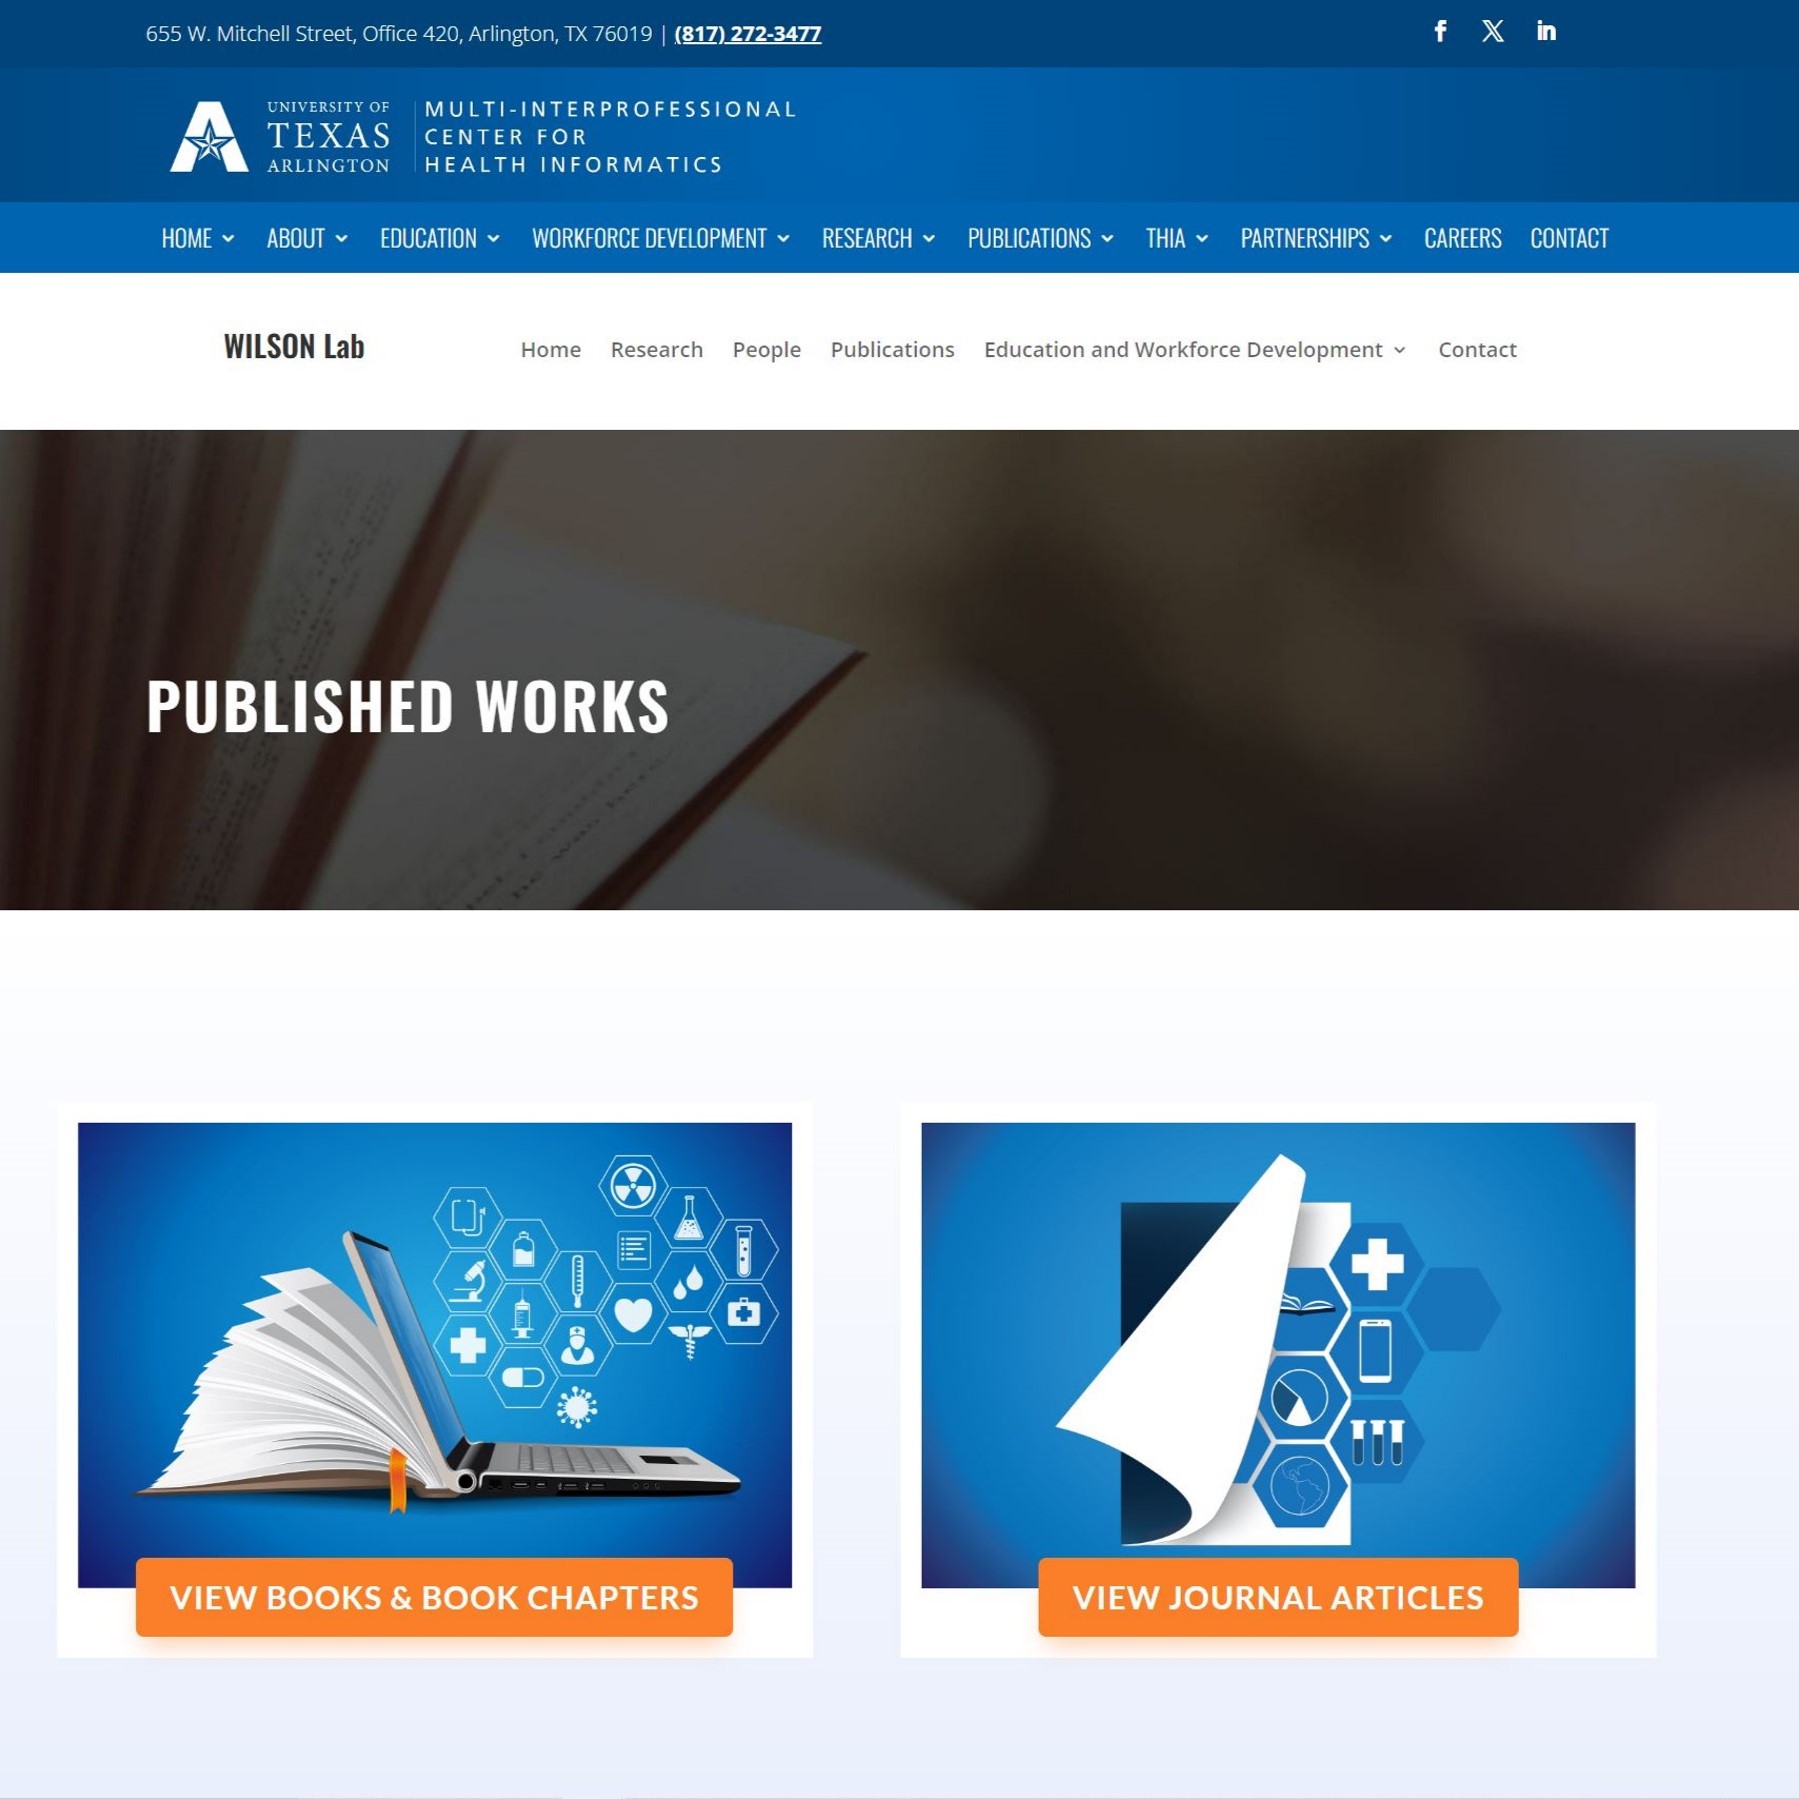 Image of the Wilson labs publications page